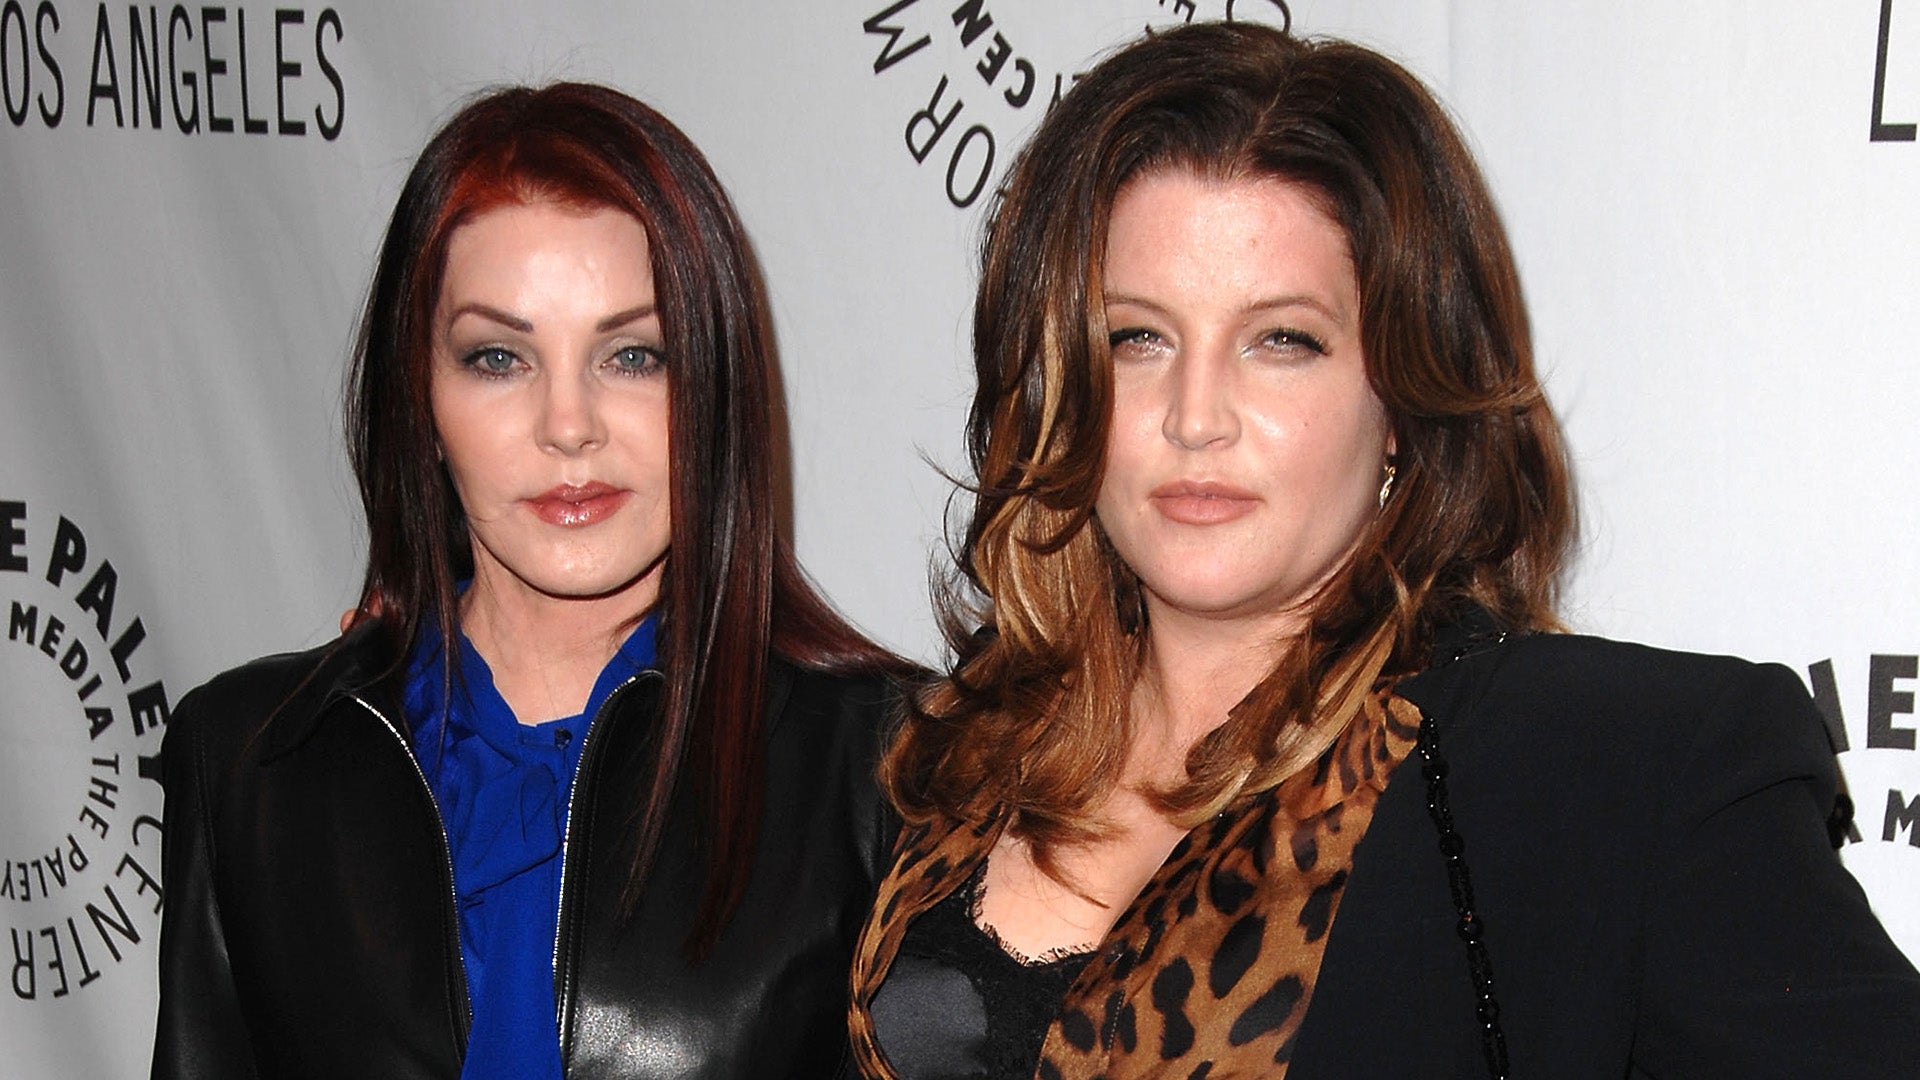 Riley Keough Looks Like a Young Priscilla Presley After Her Dark